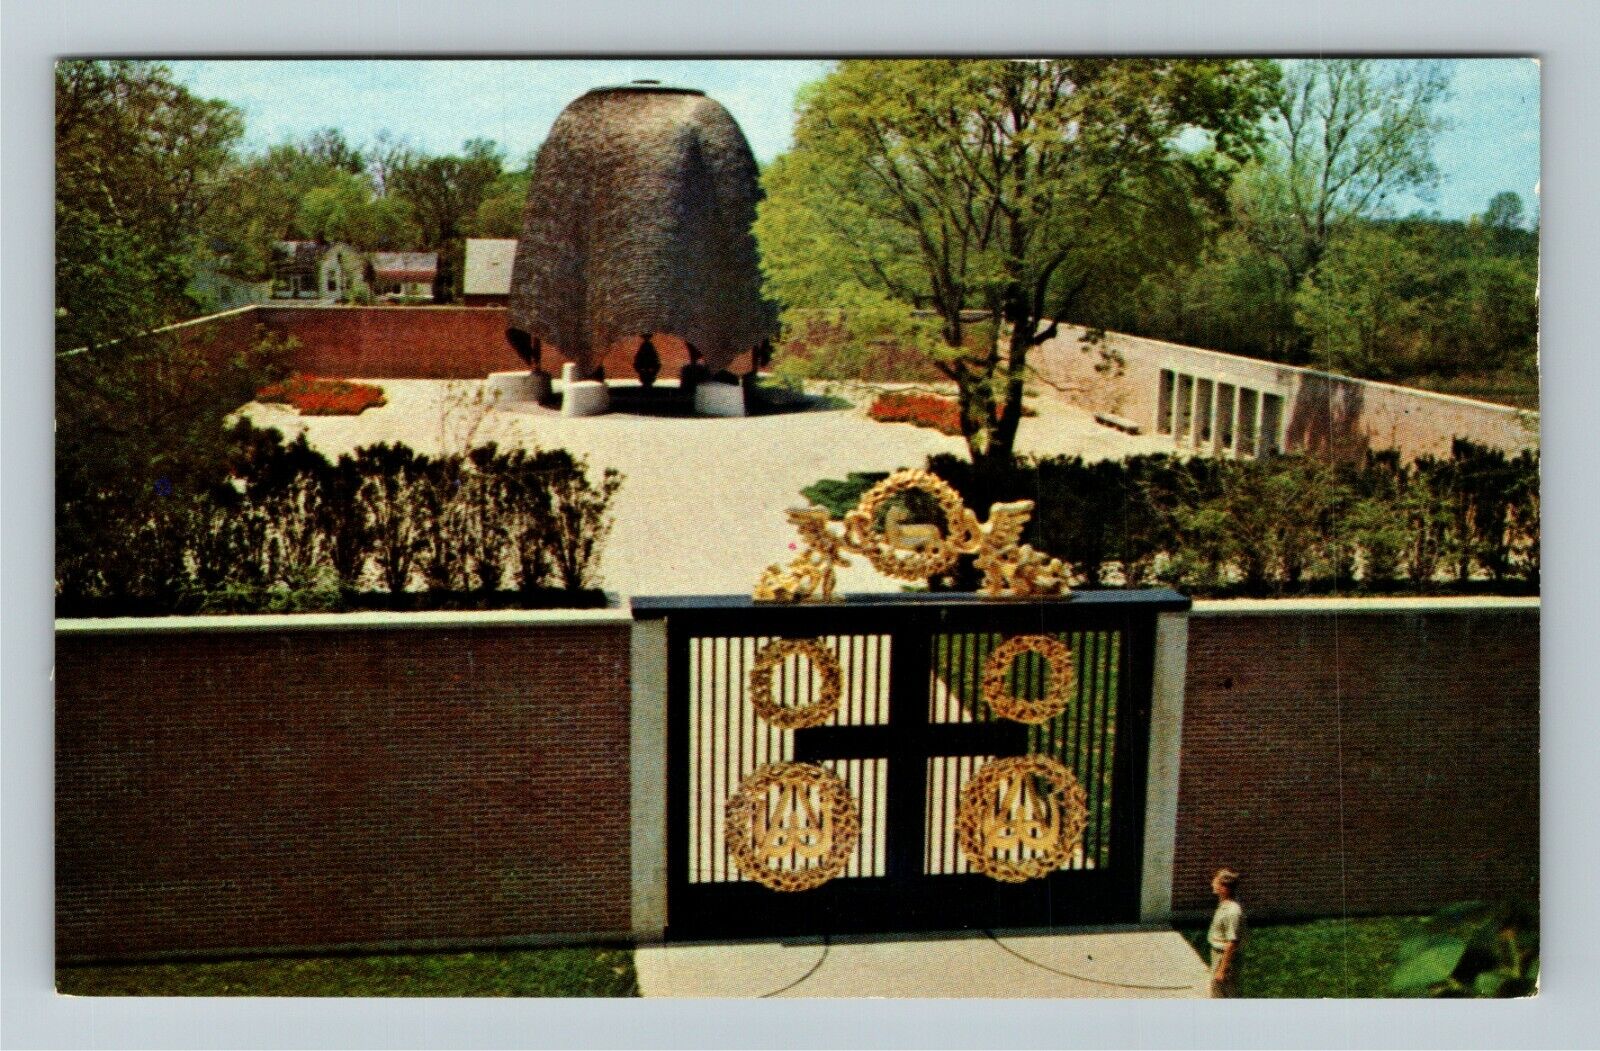 New Harmony IN-Indiana, The Roofless Church, Religion, Outside Vintage Postcard